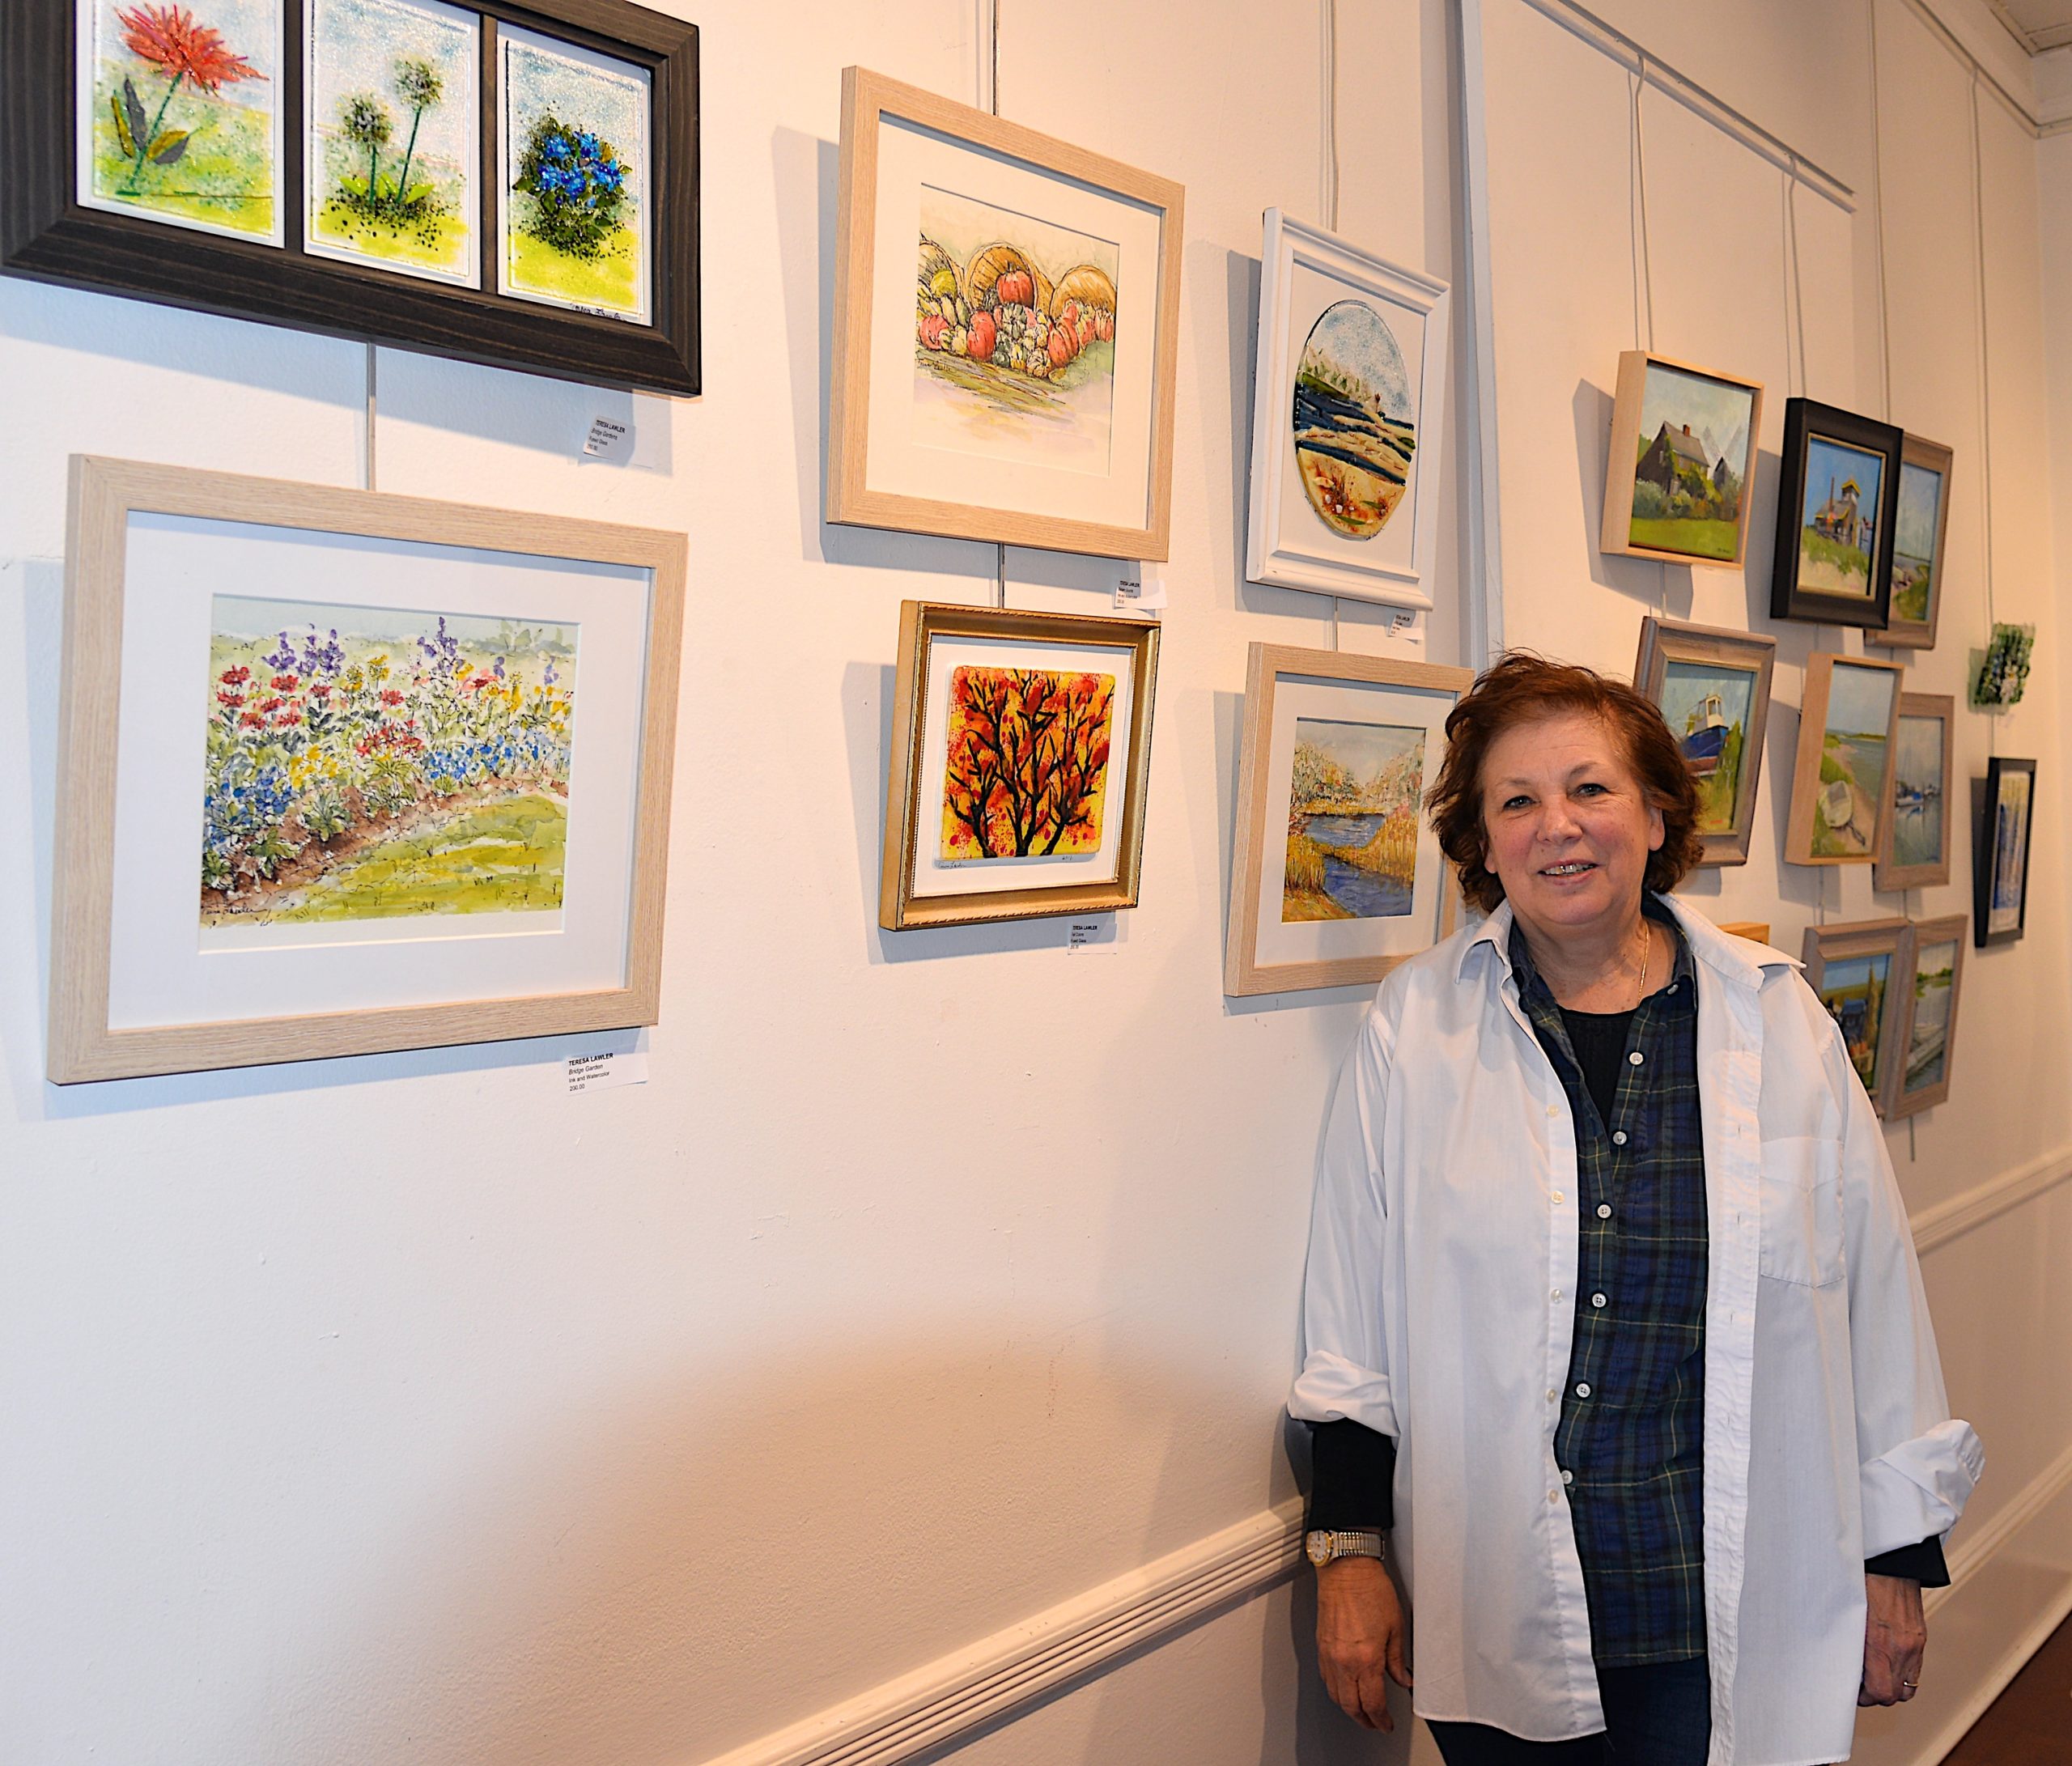 The Artists Alliance of East Hampton held an art exhibit at Ashawagh Hall this weekend, featuring then work of the Wednesday Group, Plein-Air artists using local scenery for inspiration There were also workshops in painting and glass fusion. Teresa Lawler with her artwork.  KYRIL BROMLEY 